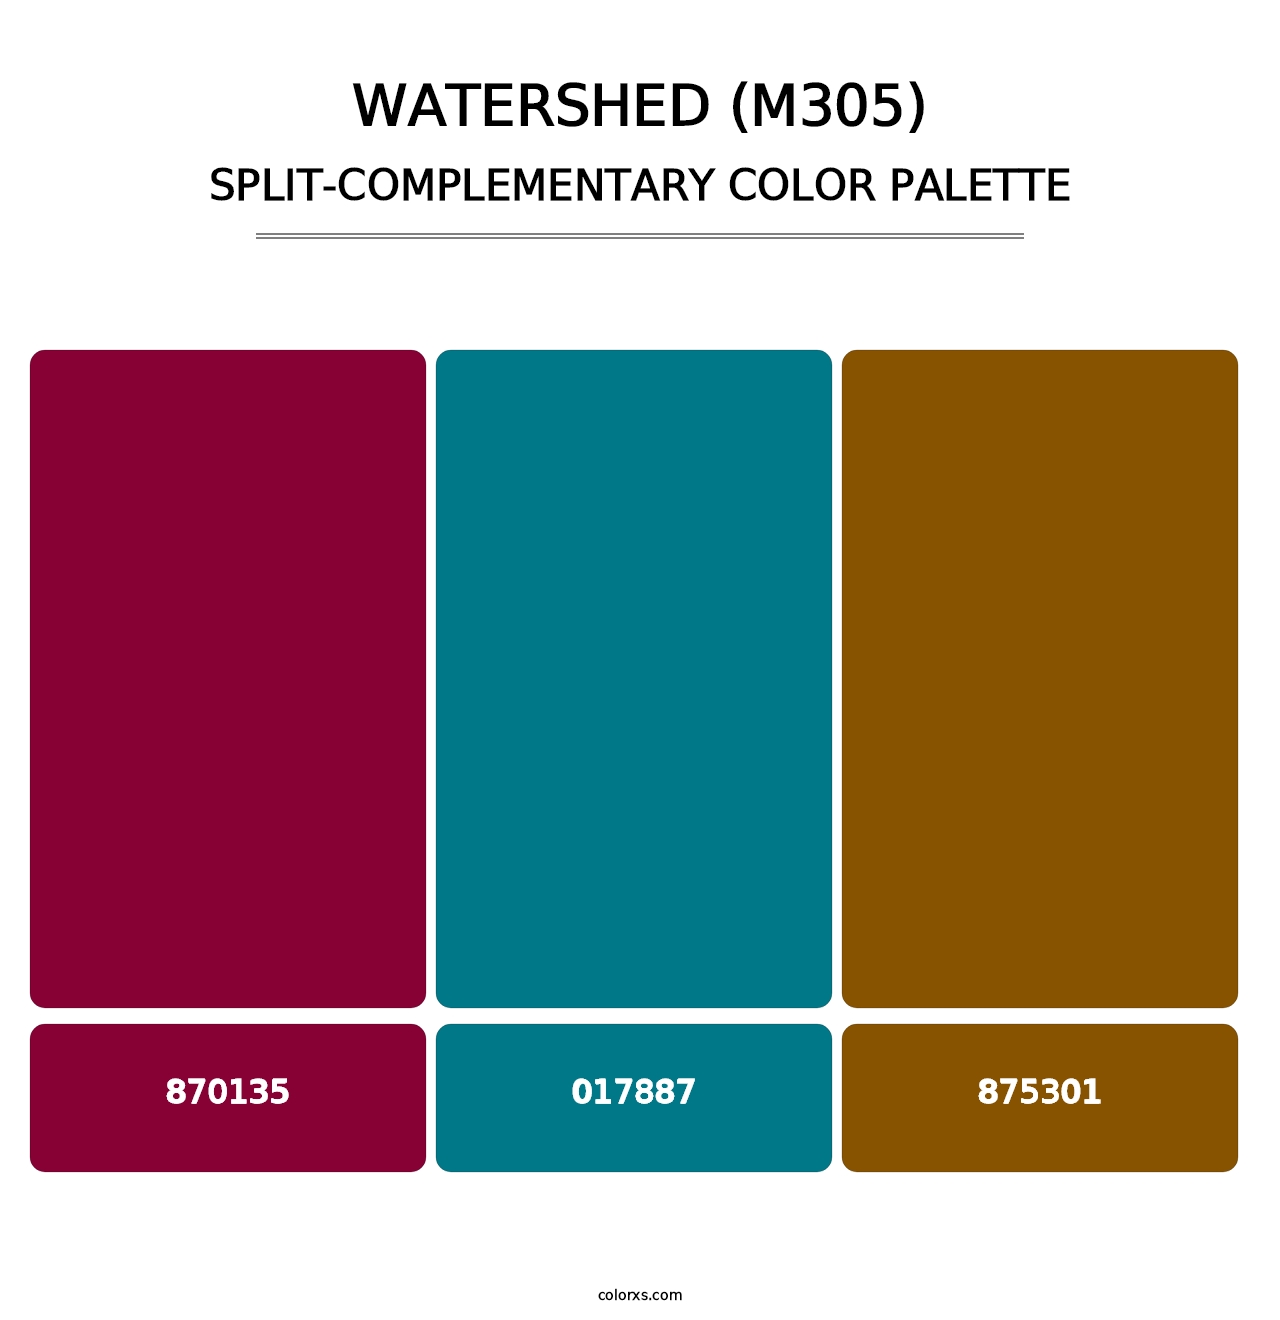 Watershed (M305) - Split-Complementary Color Palette